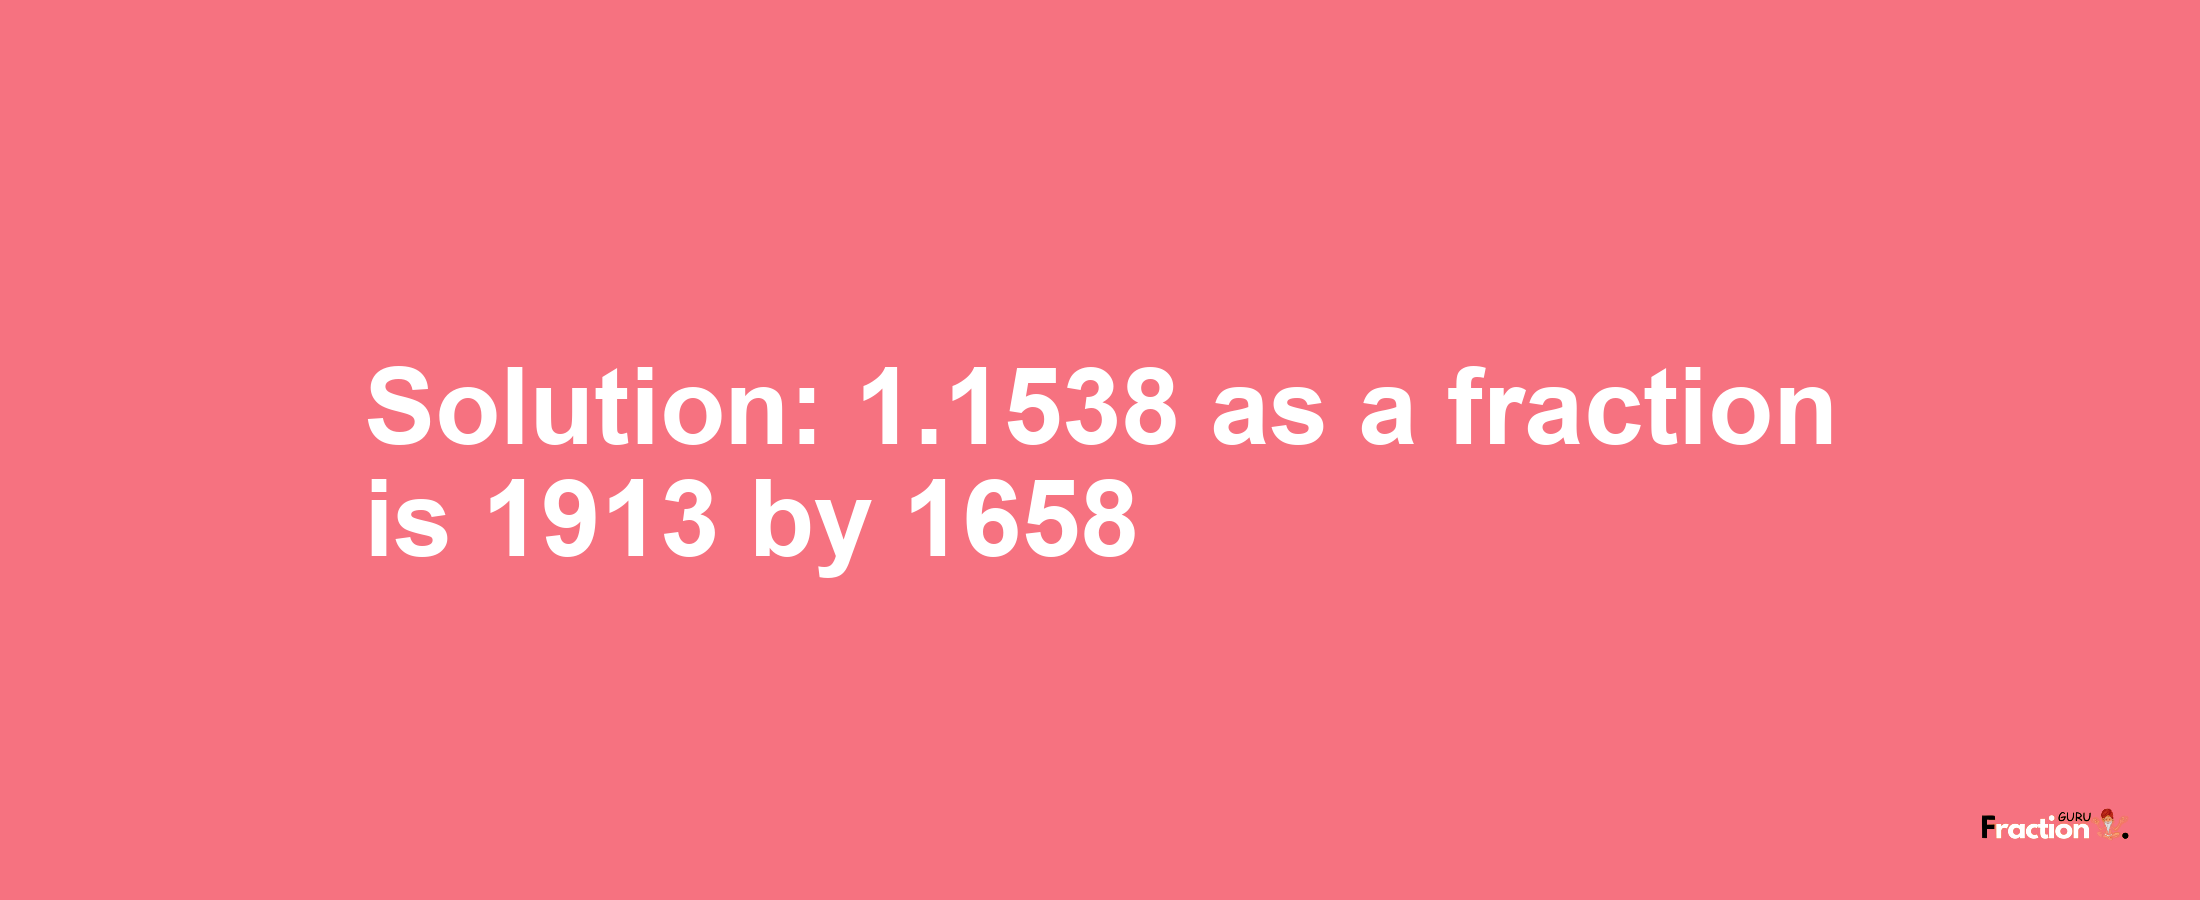 Solution:1.1538 as a fraction is 1913/1658